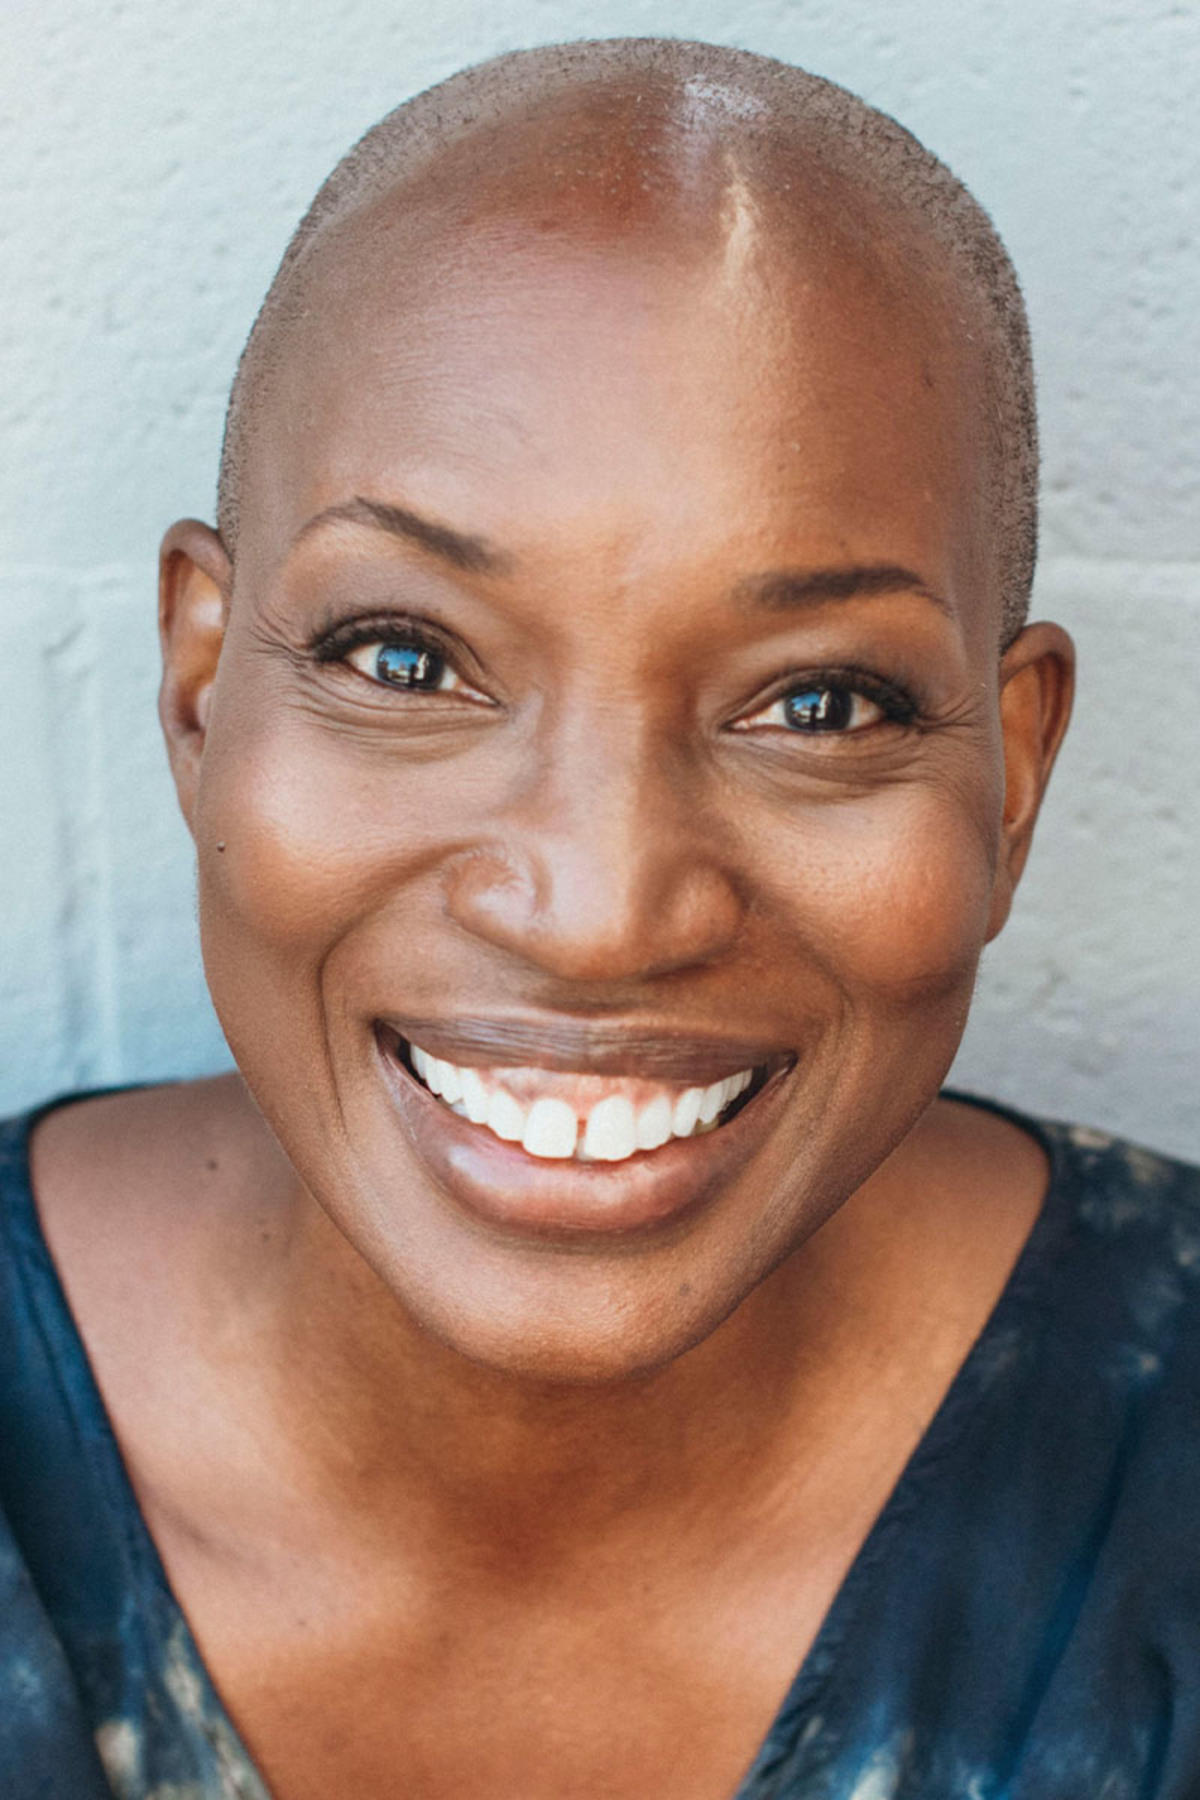 Tracee Stanley color portrait. Tracee is a Black woman leaning against a light-colored wall. Tracee is smiling and wearing a subtly printed top.